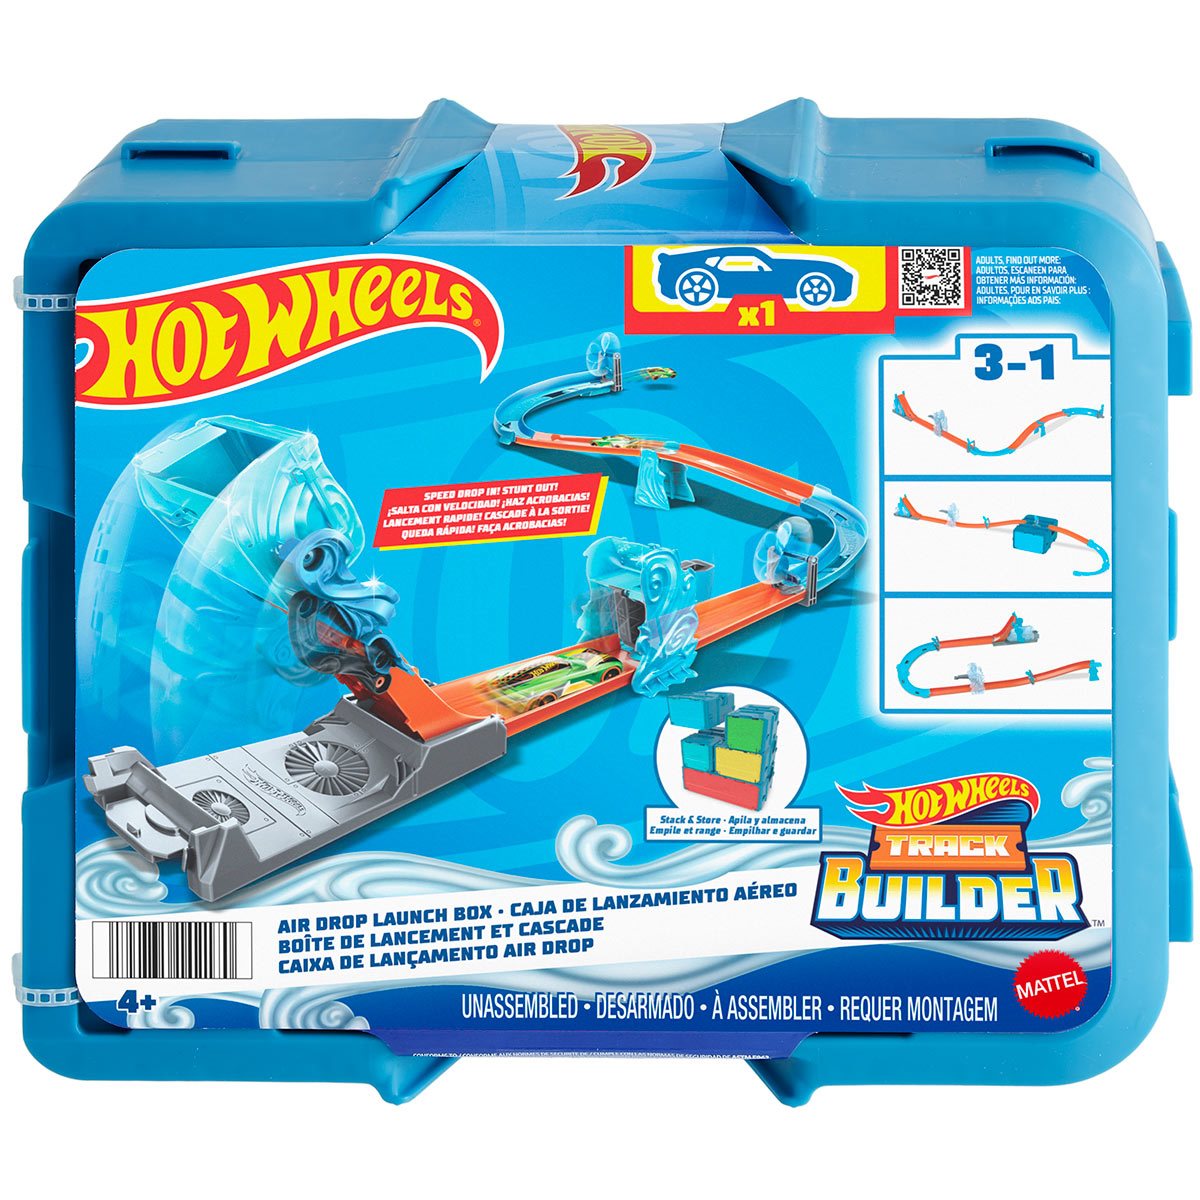 Hot Wheels children's toys have inspired grown-up car builders